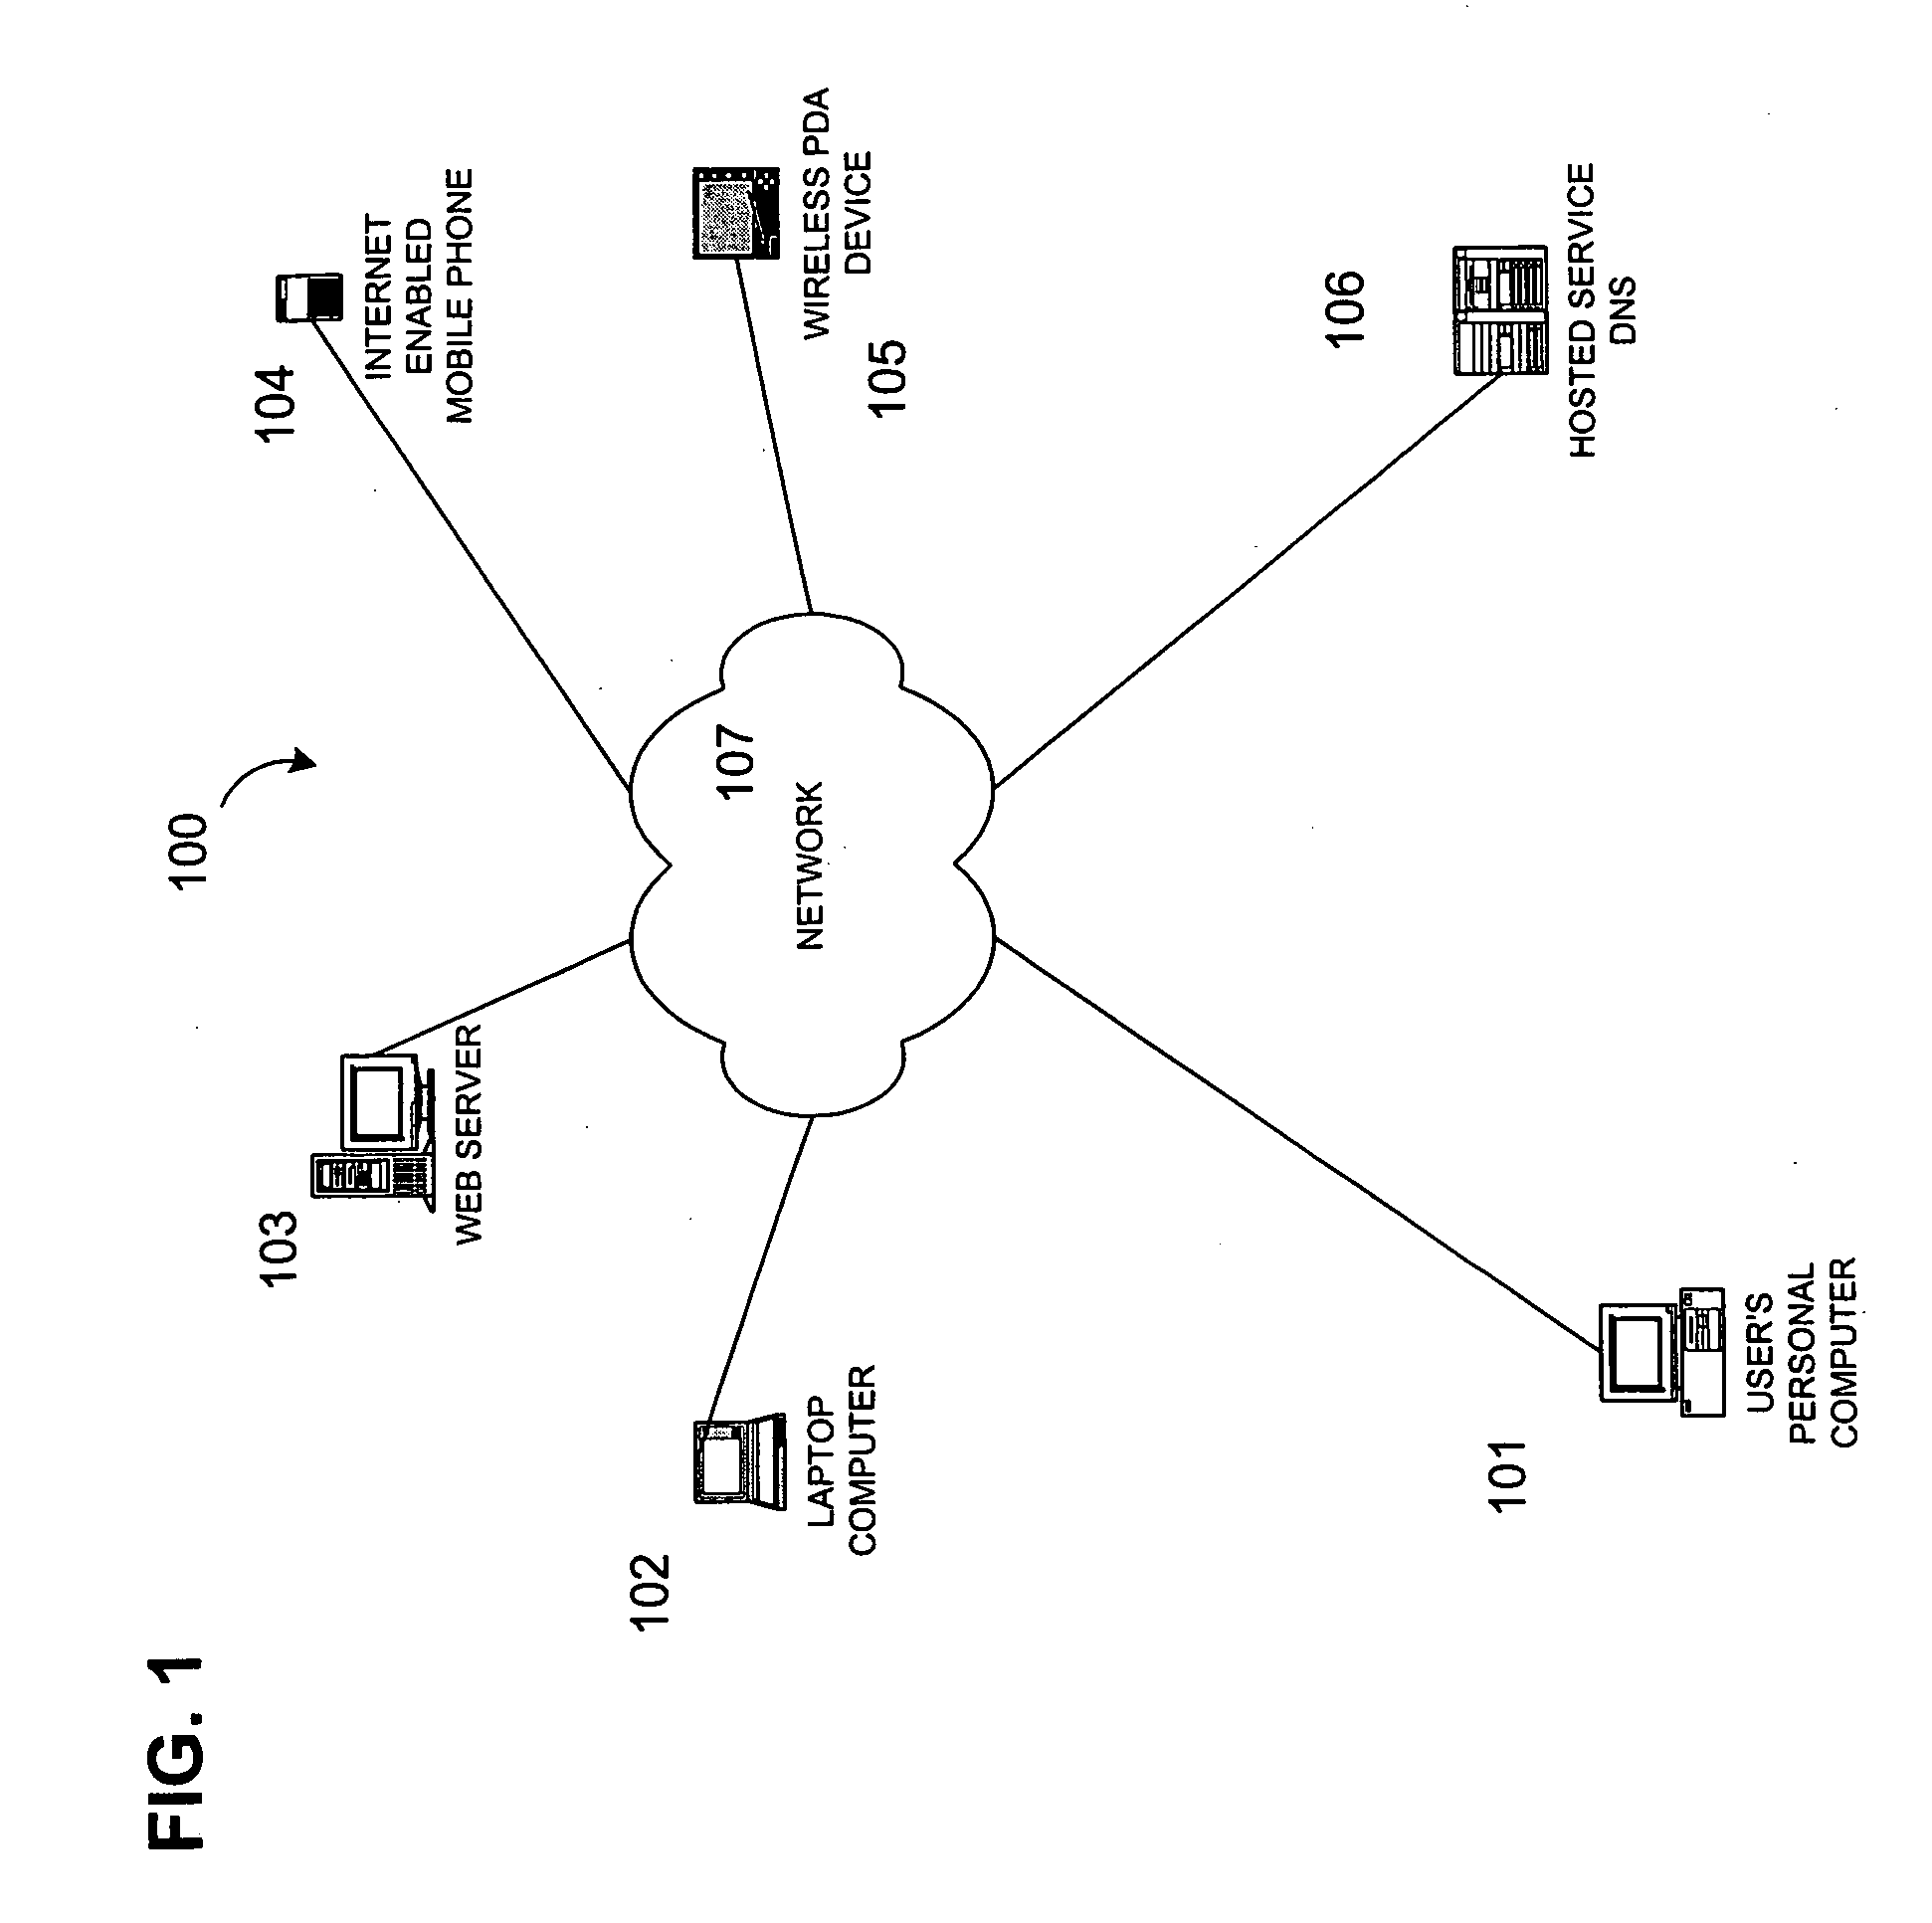 Systems and methods for improved data sharing and content transformation